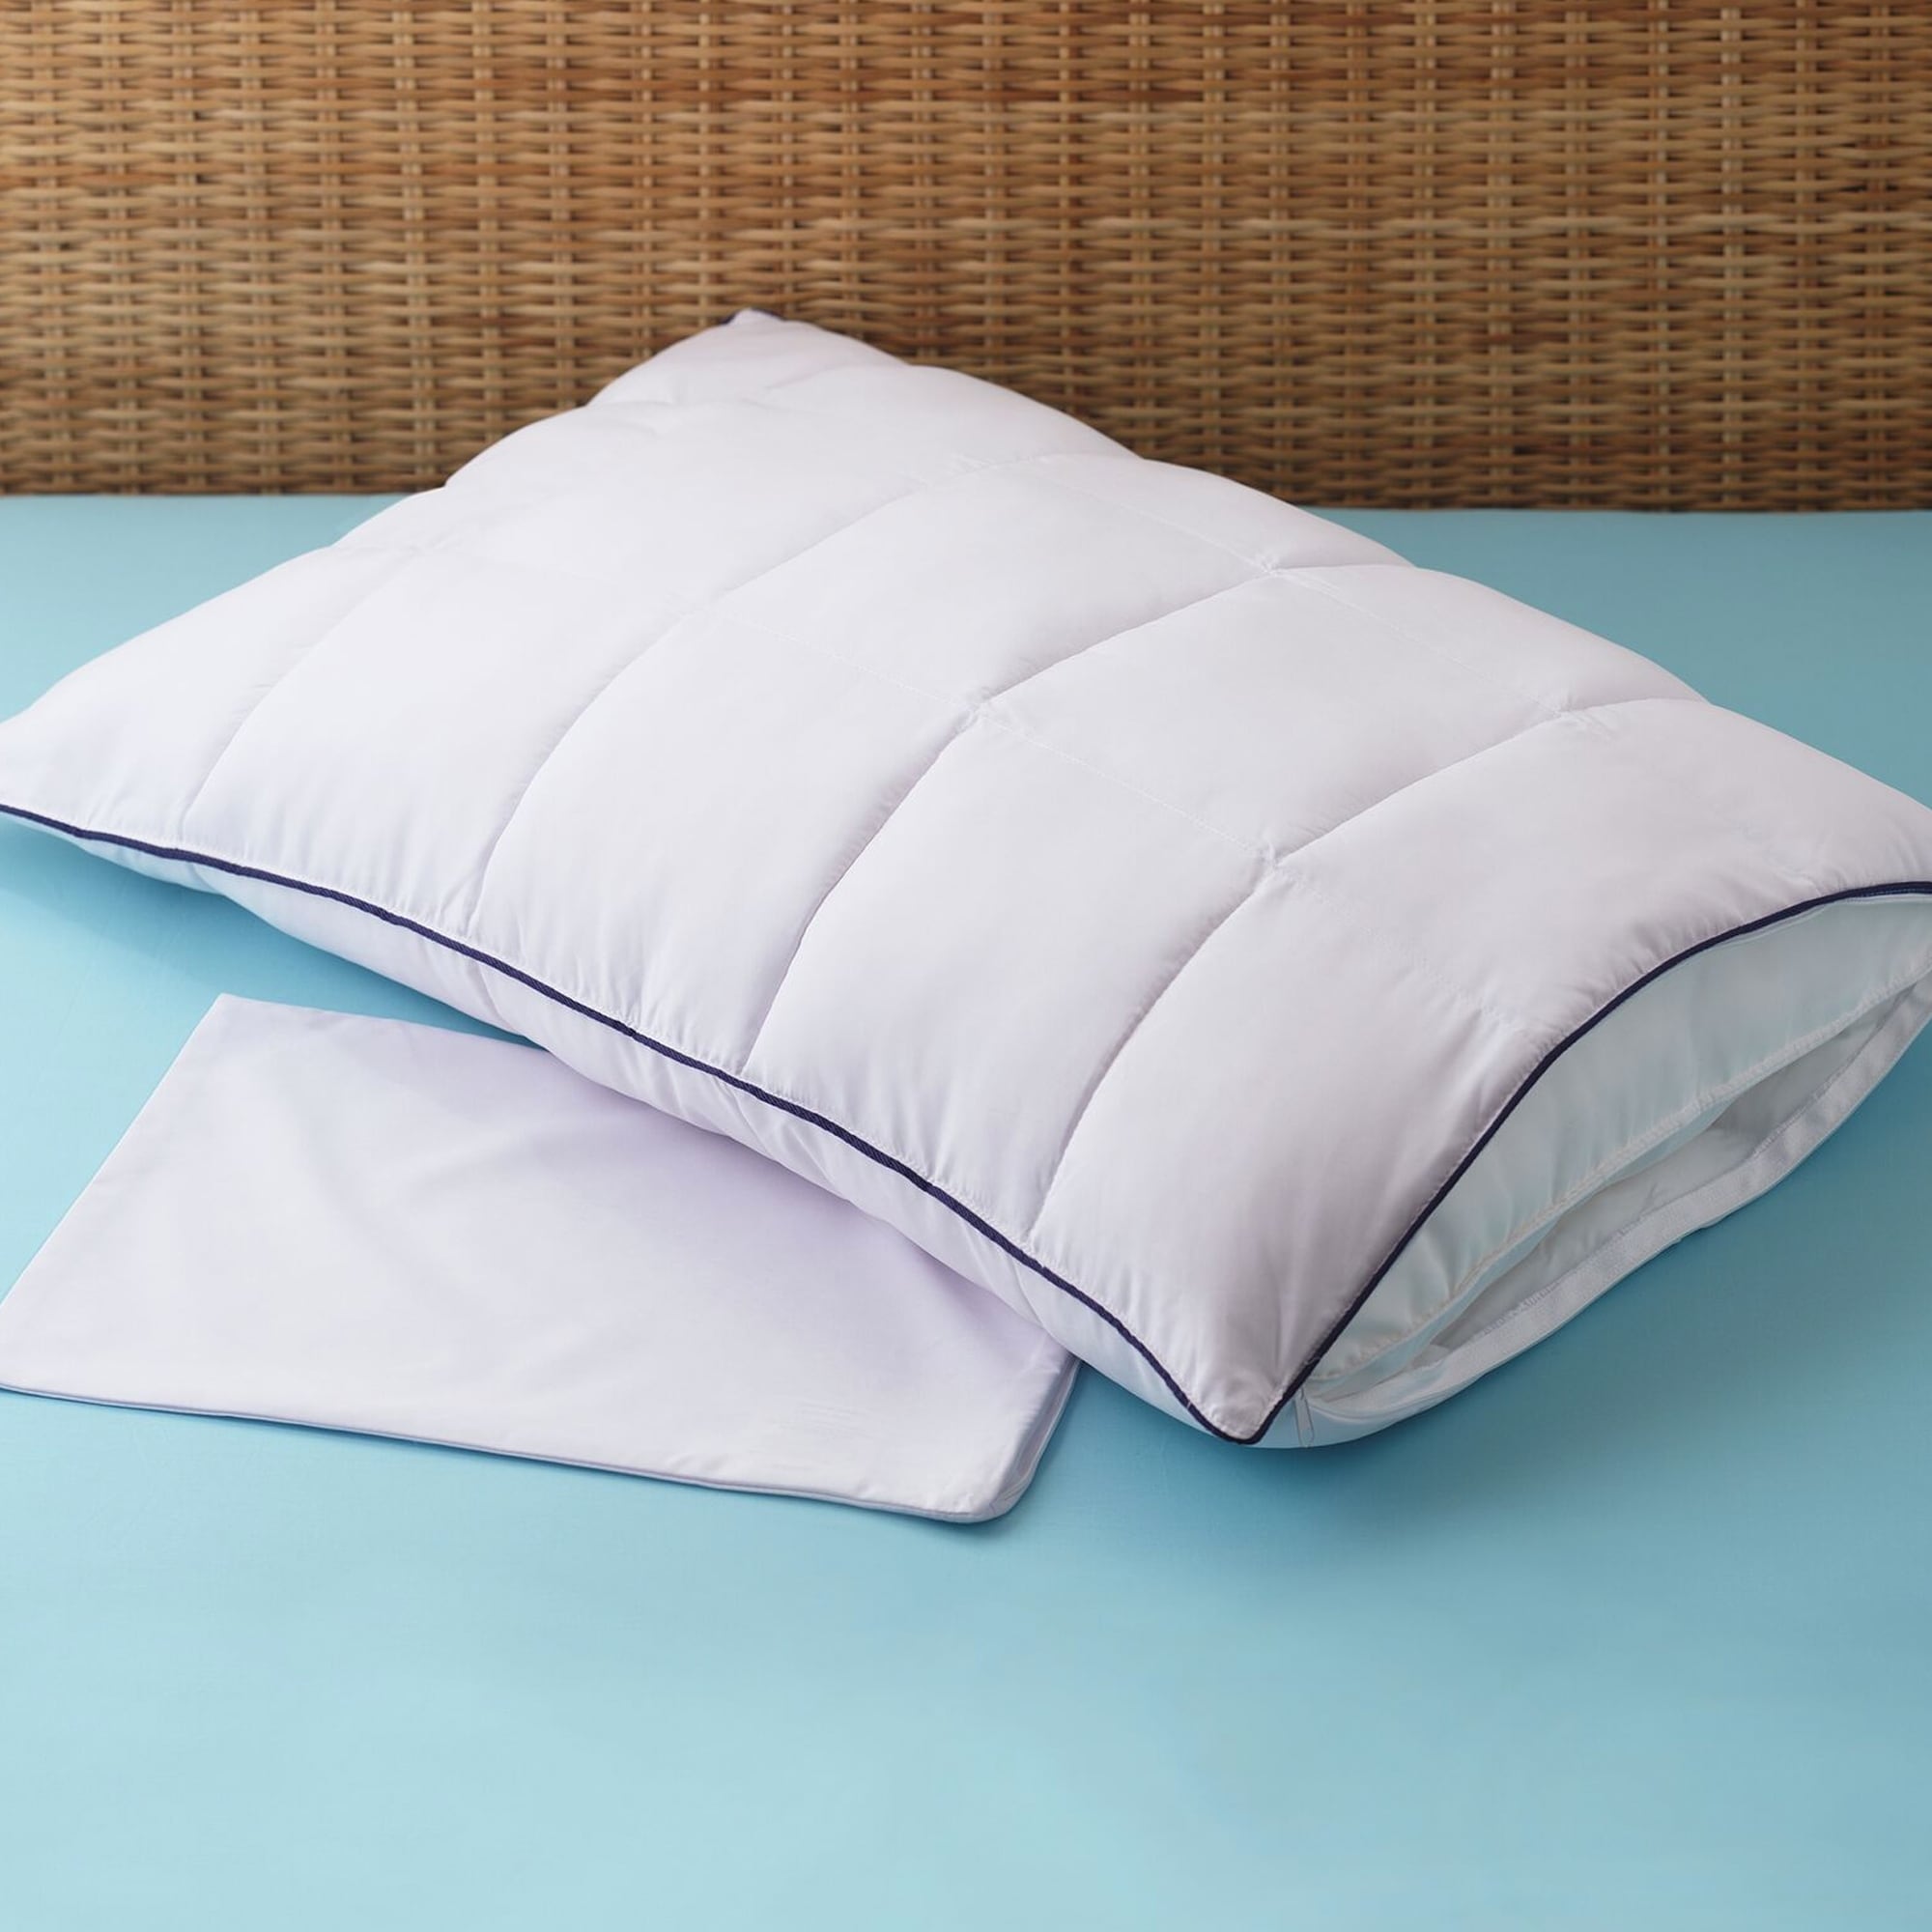 MicronOne Allergy Free 2-in-1 Pillow Enhancer and Travel Pillow - White - Queen